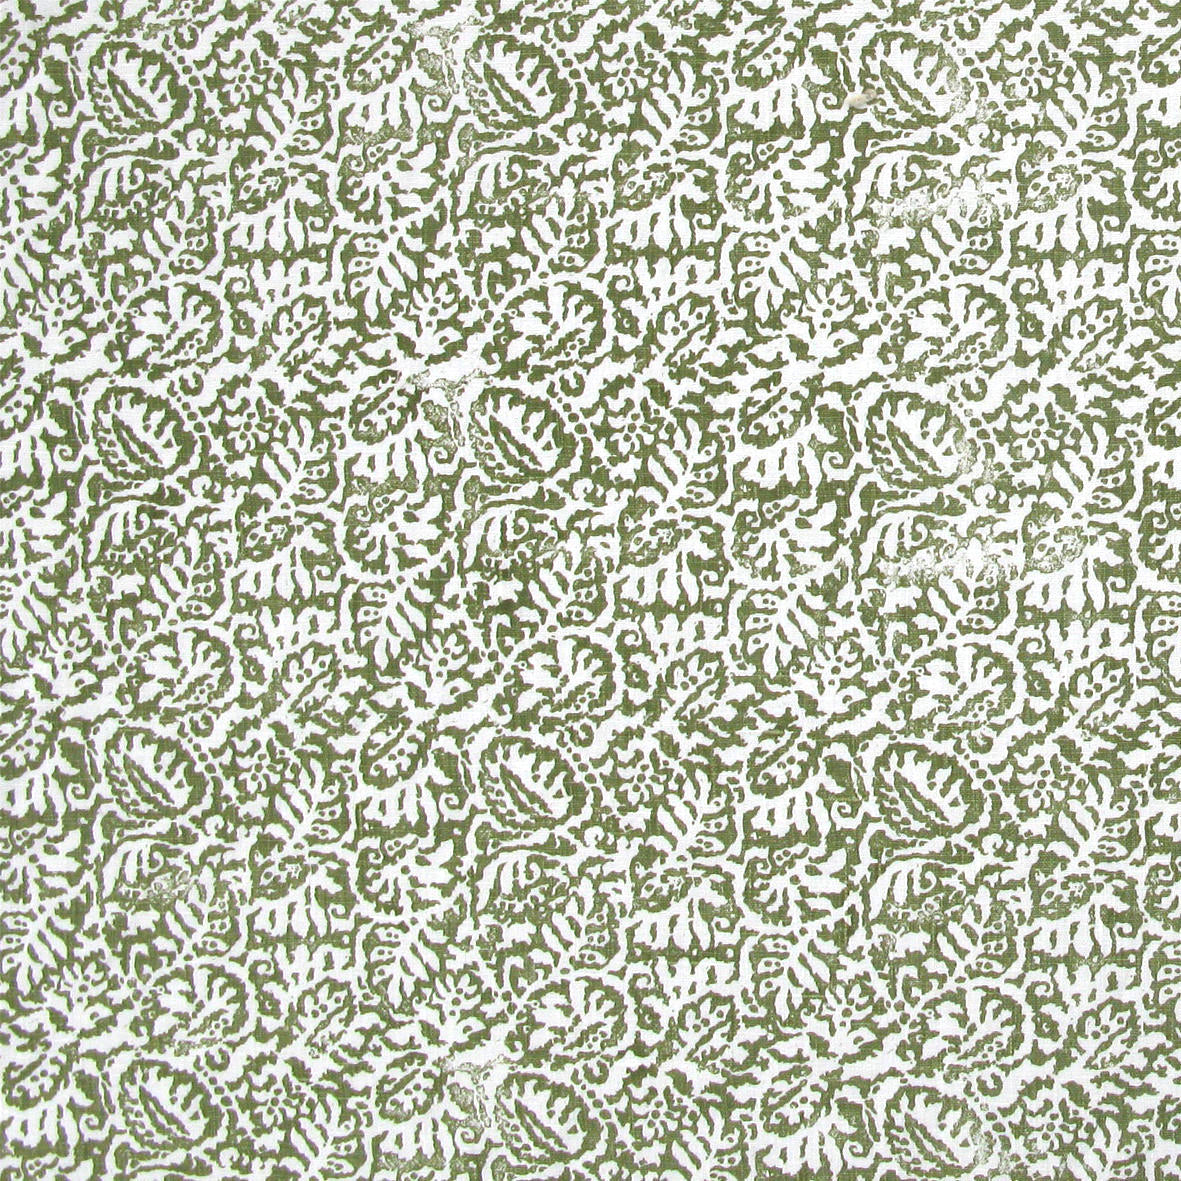 Detail of fabric in a dense paisley print in white on a mottled green field.